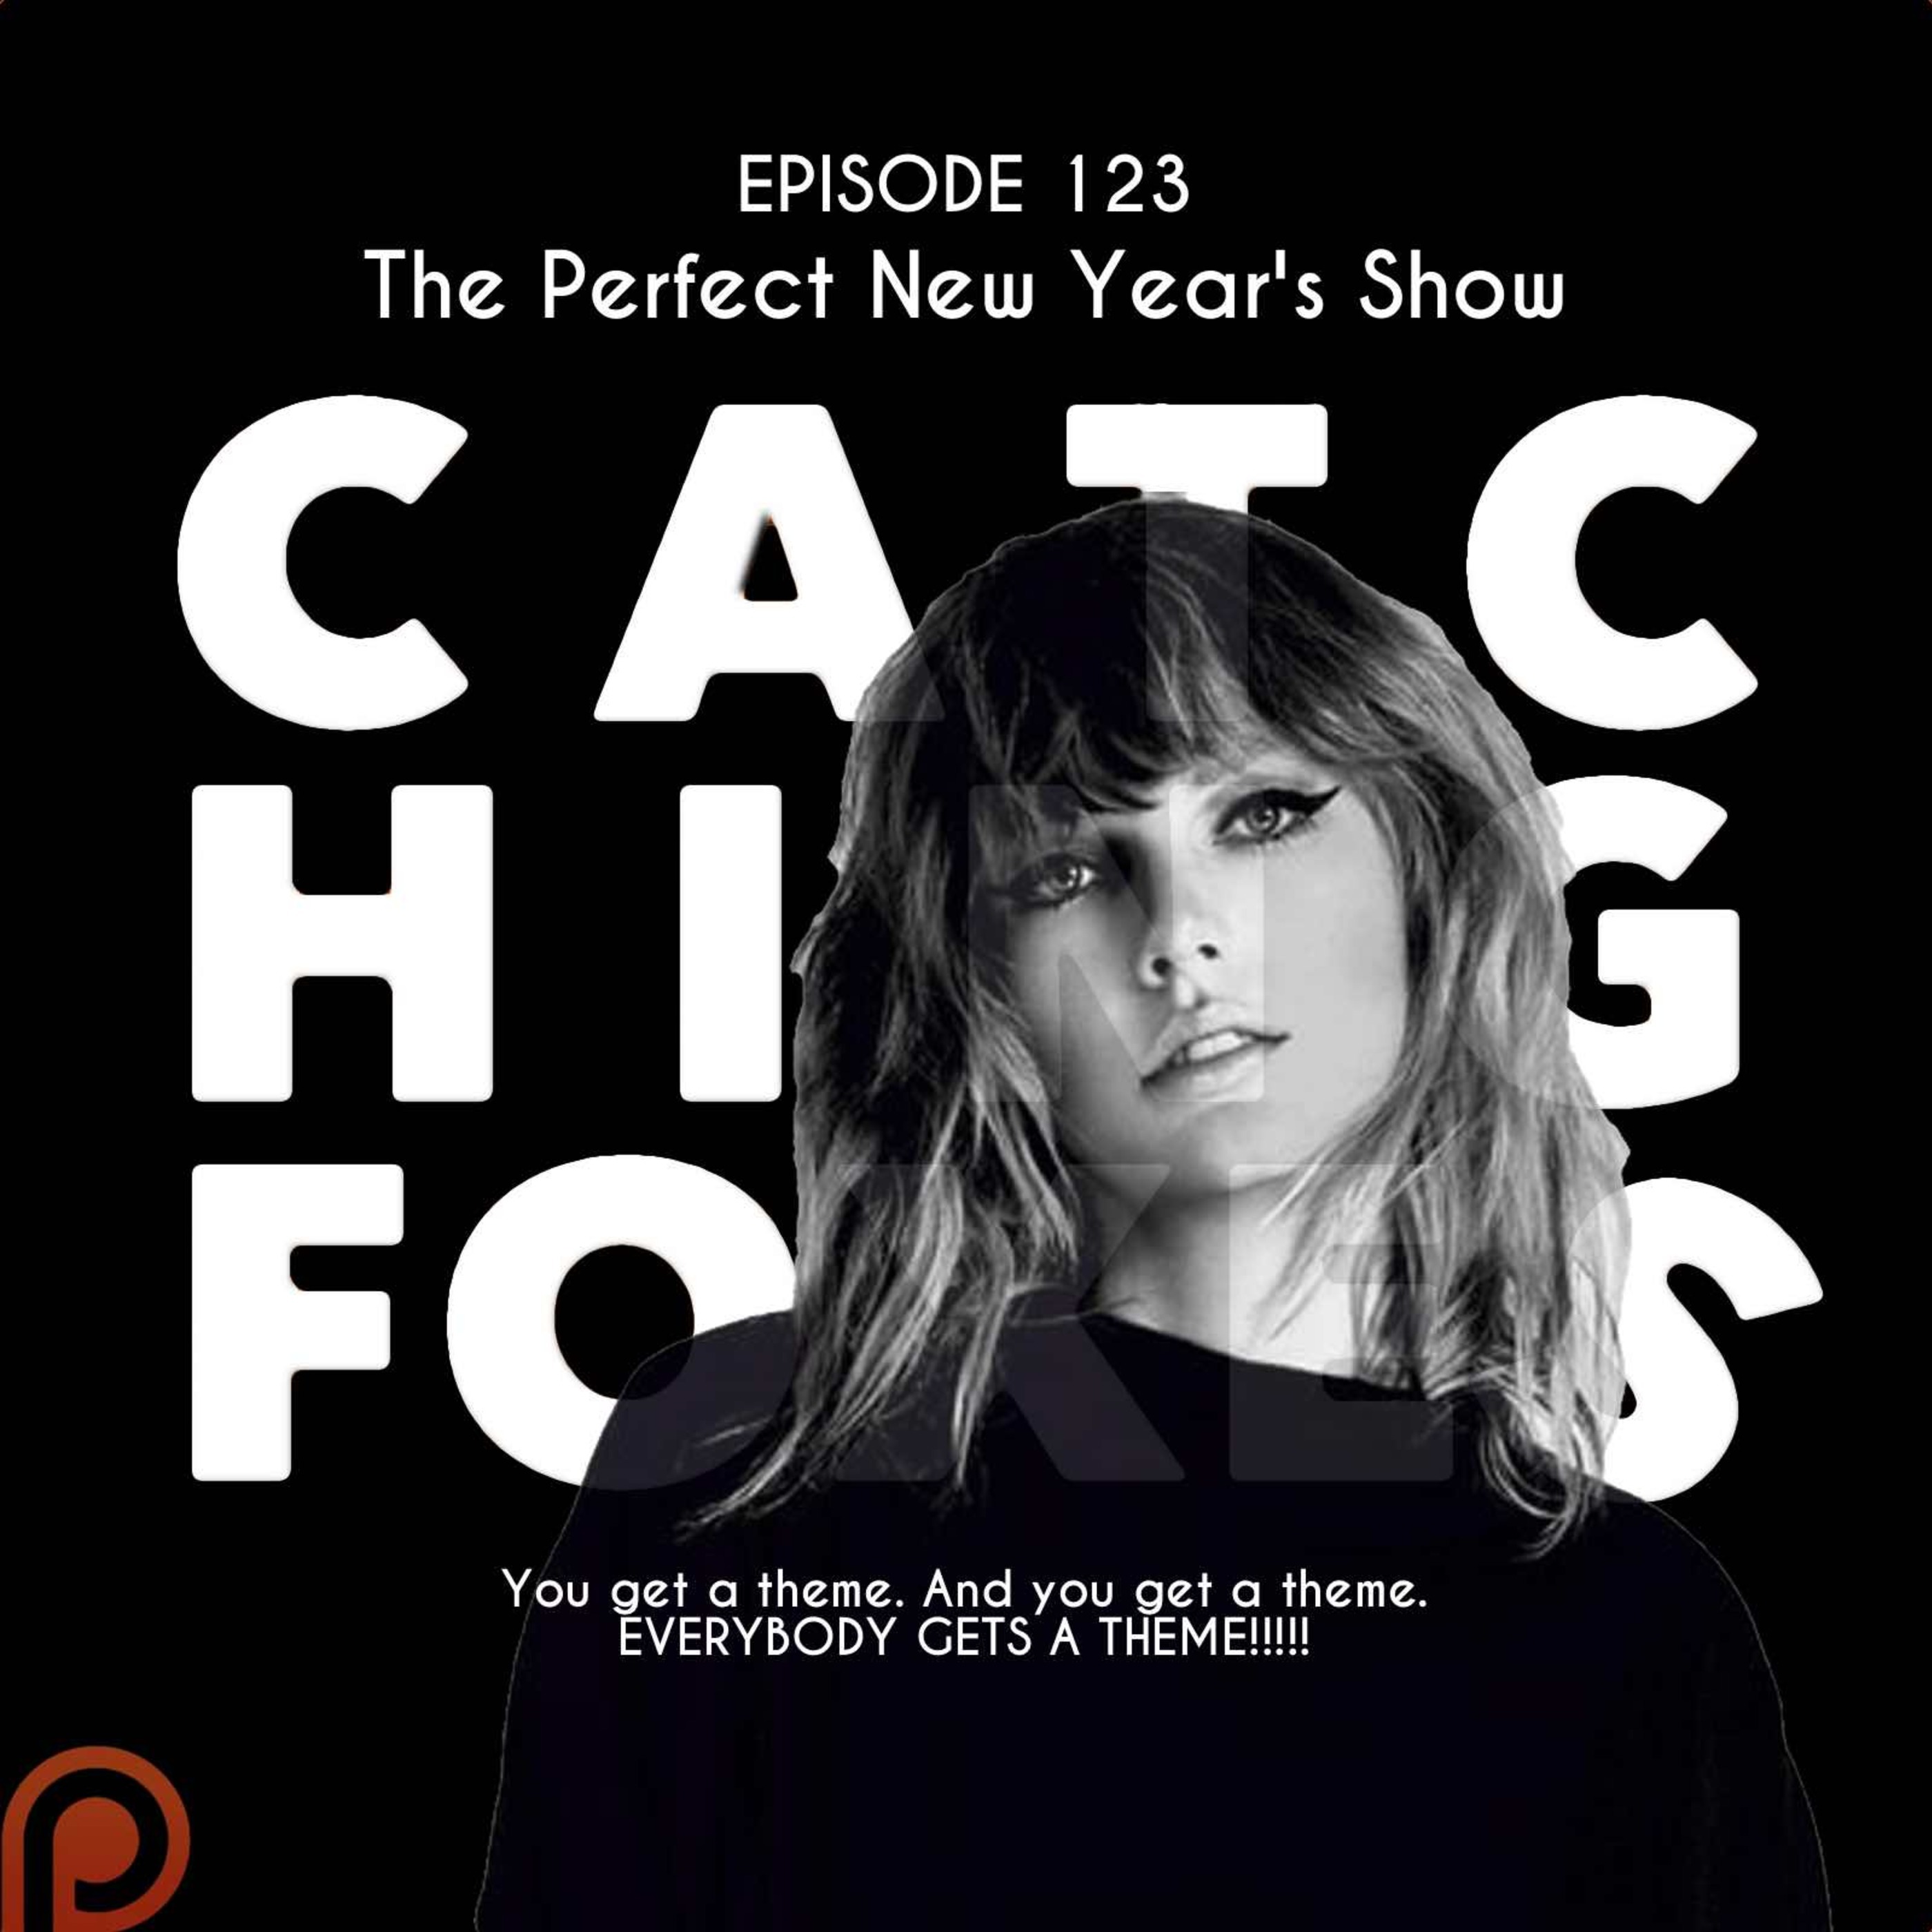 The Perfect New Year's Show